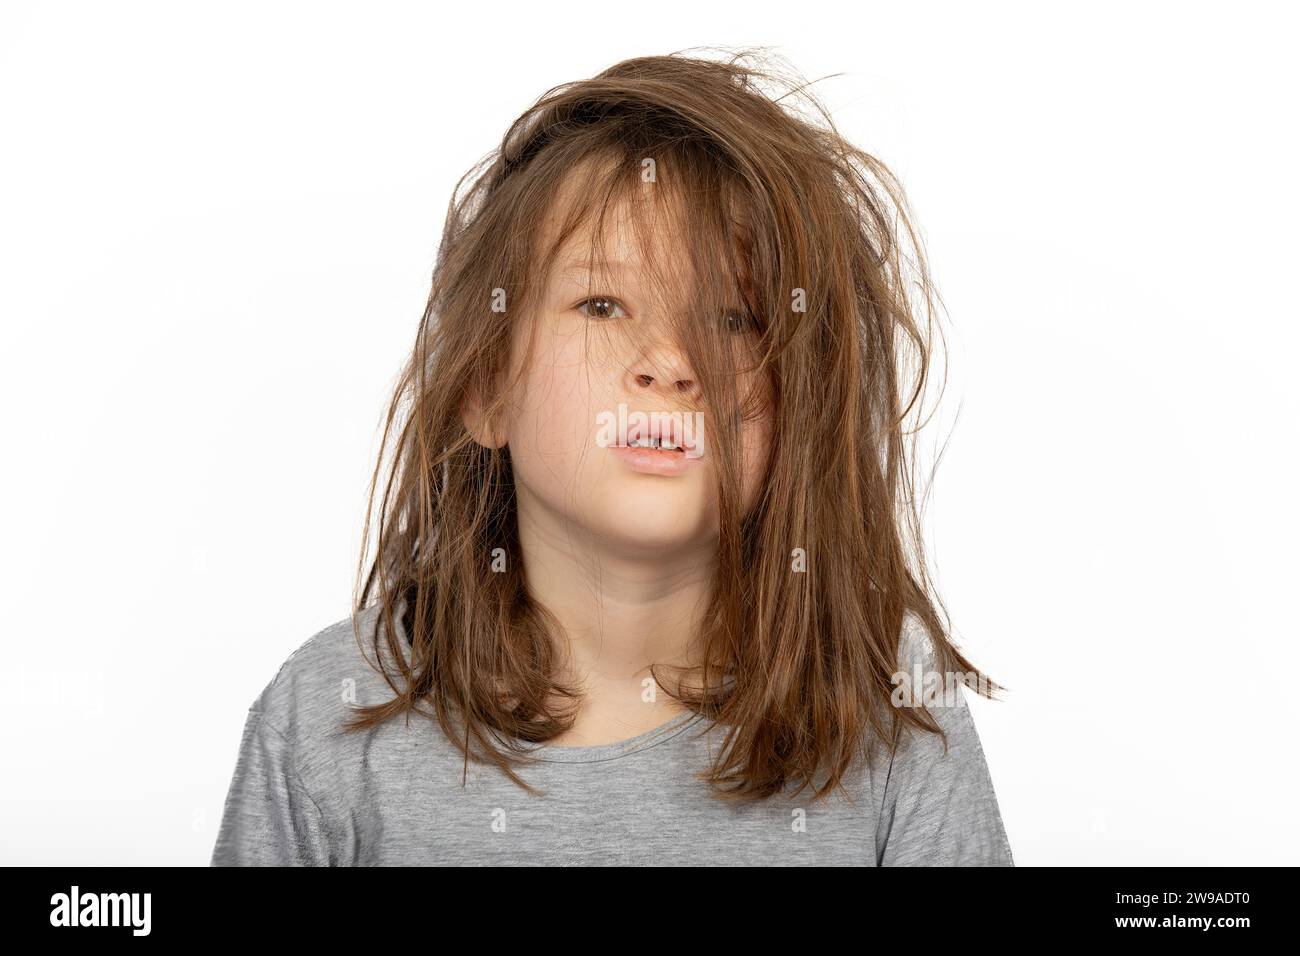 Grumpy Christmas Morning: Portrait of Young Girl with a Bad Hair Day on White Background Stock Photo